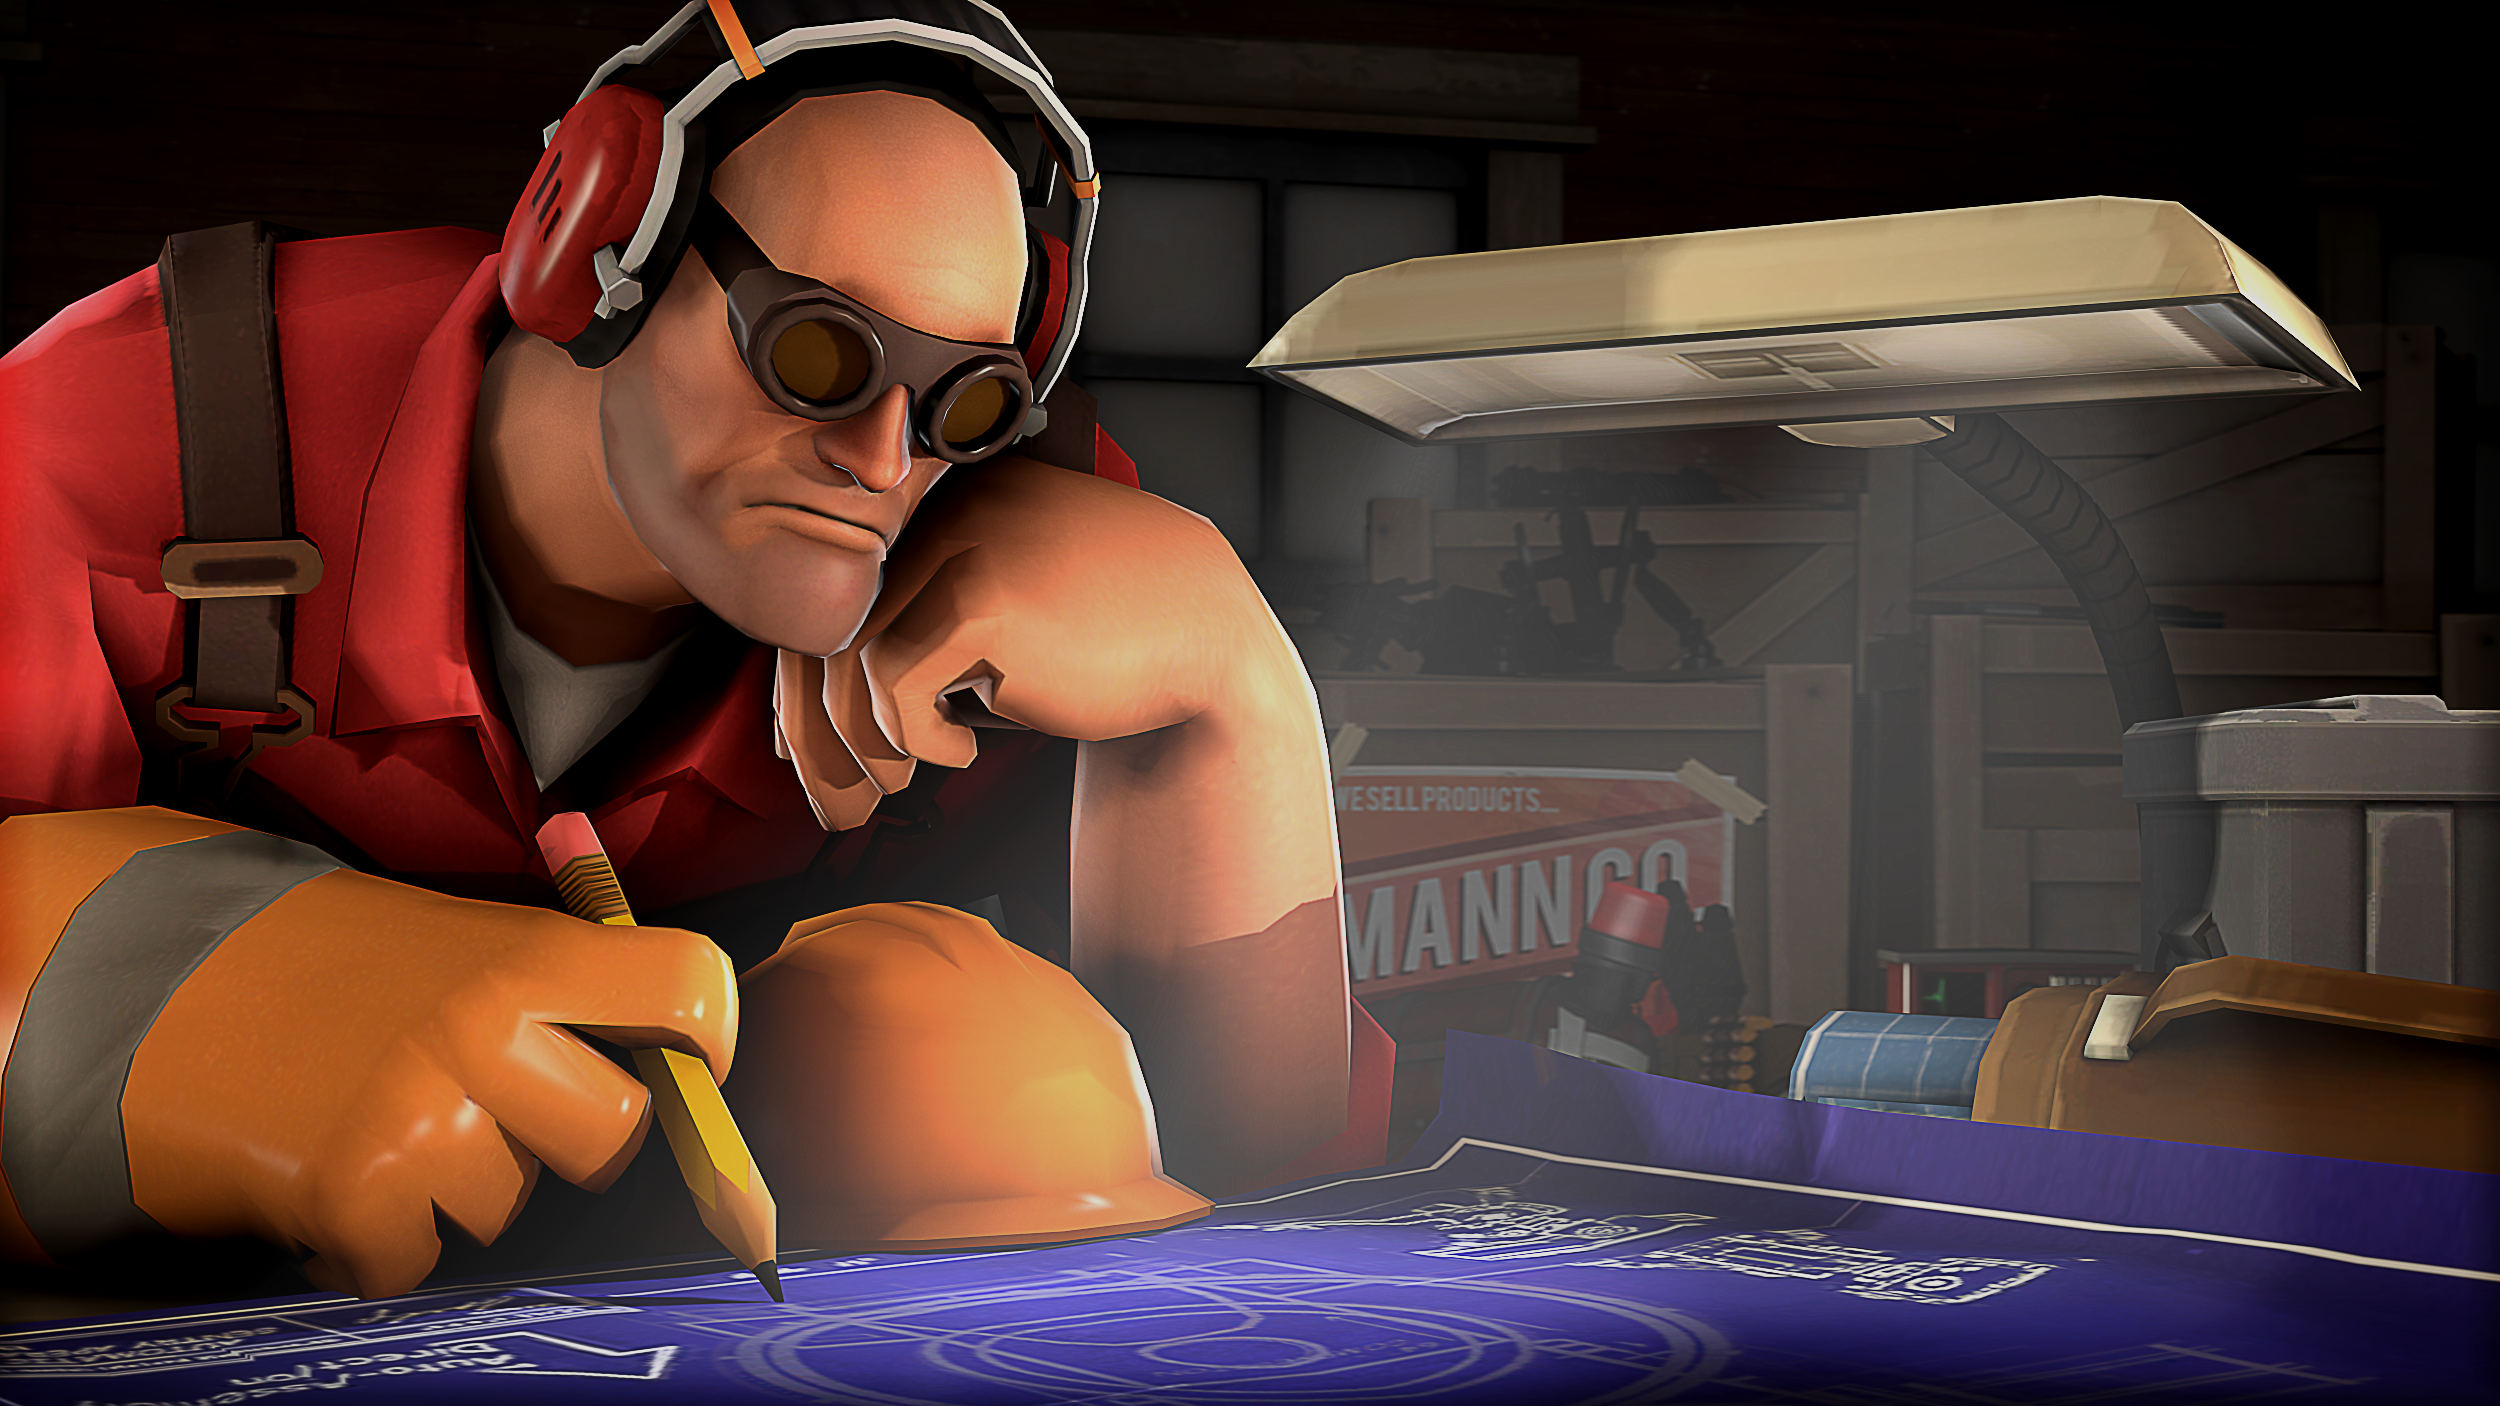 How TF2's latest update changed the Engineer forever | PC Gamer